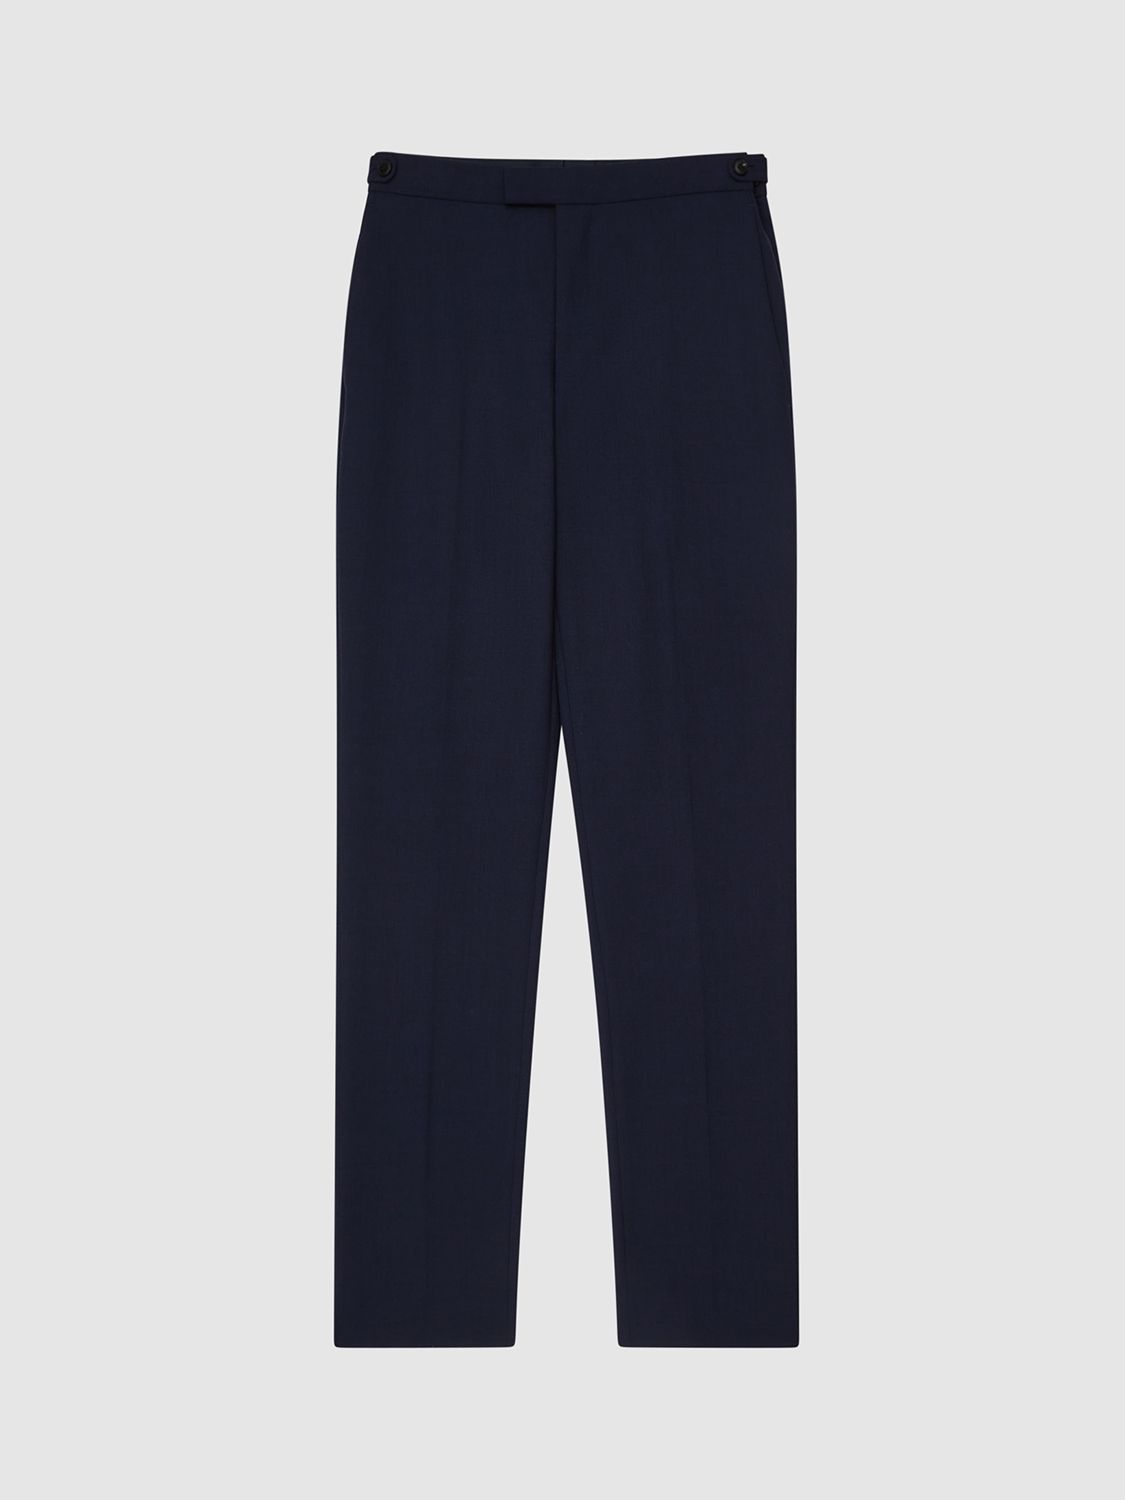 Reiss Bold Tailored Wool Suit Trousers, Navy, 28R